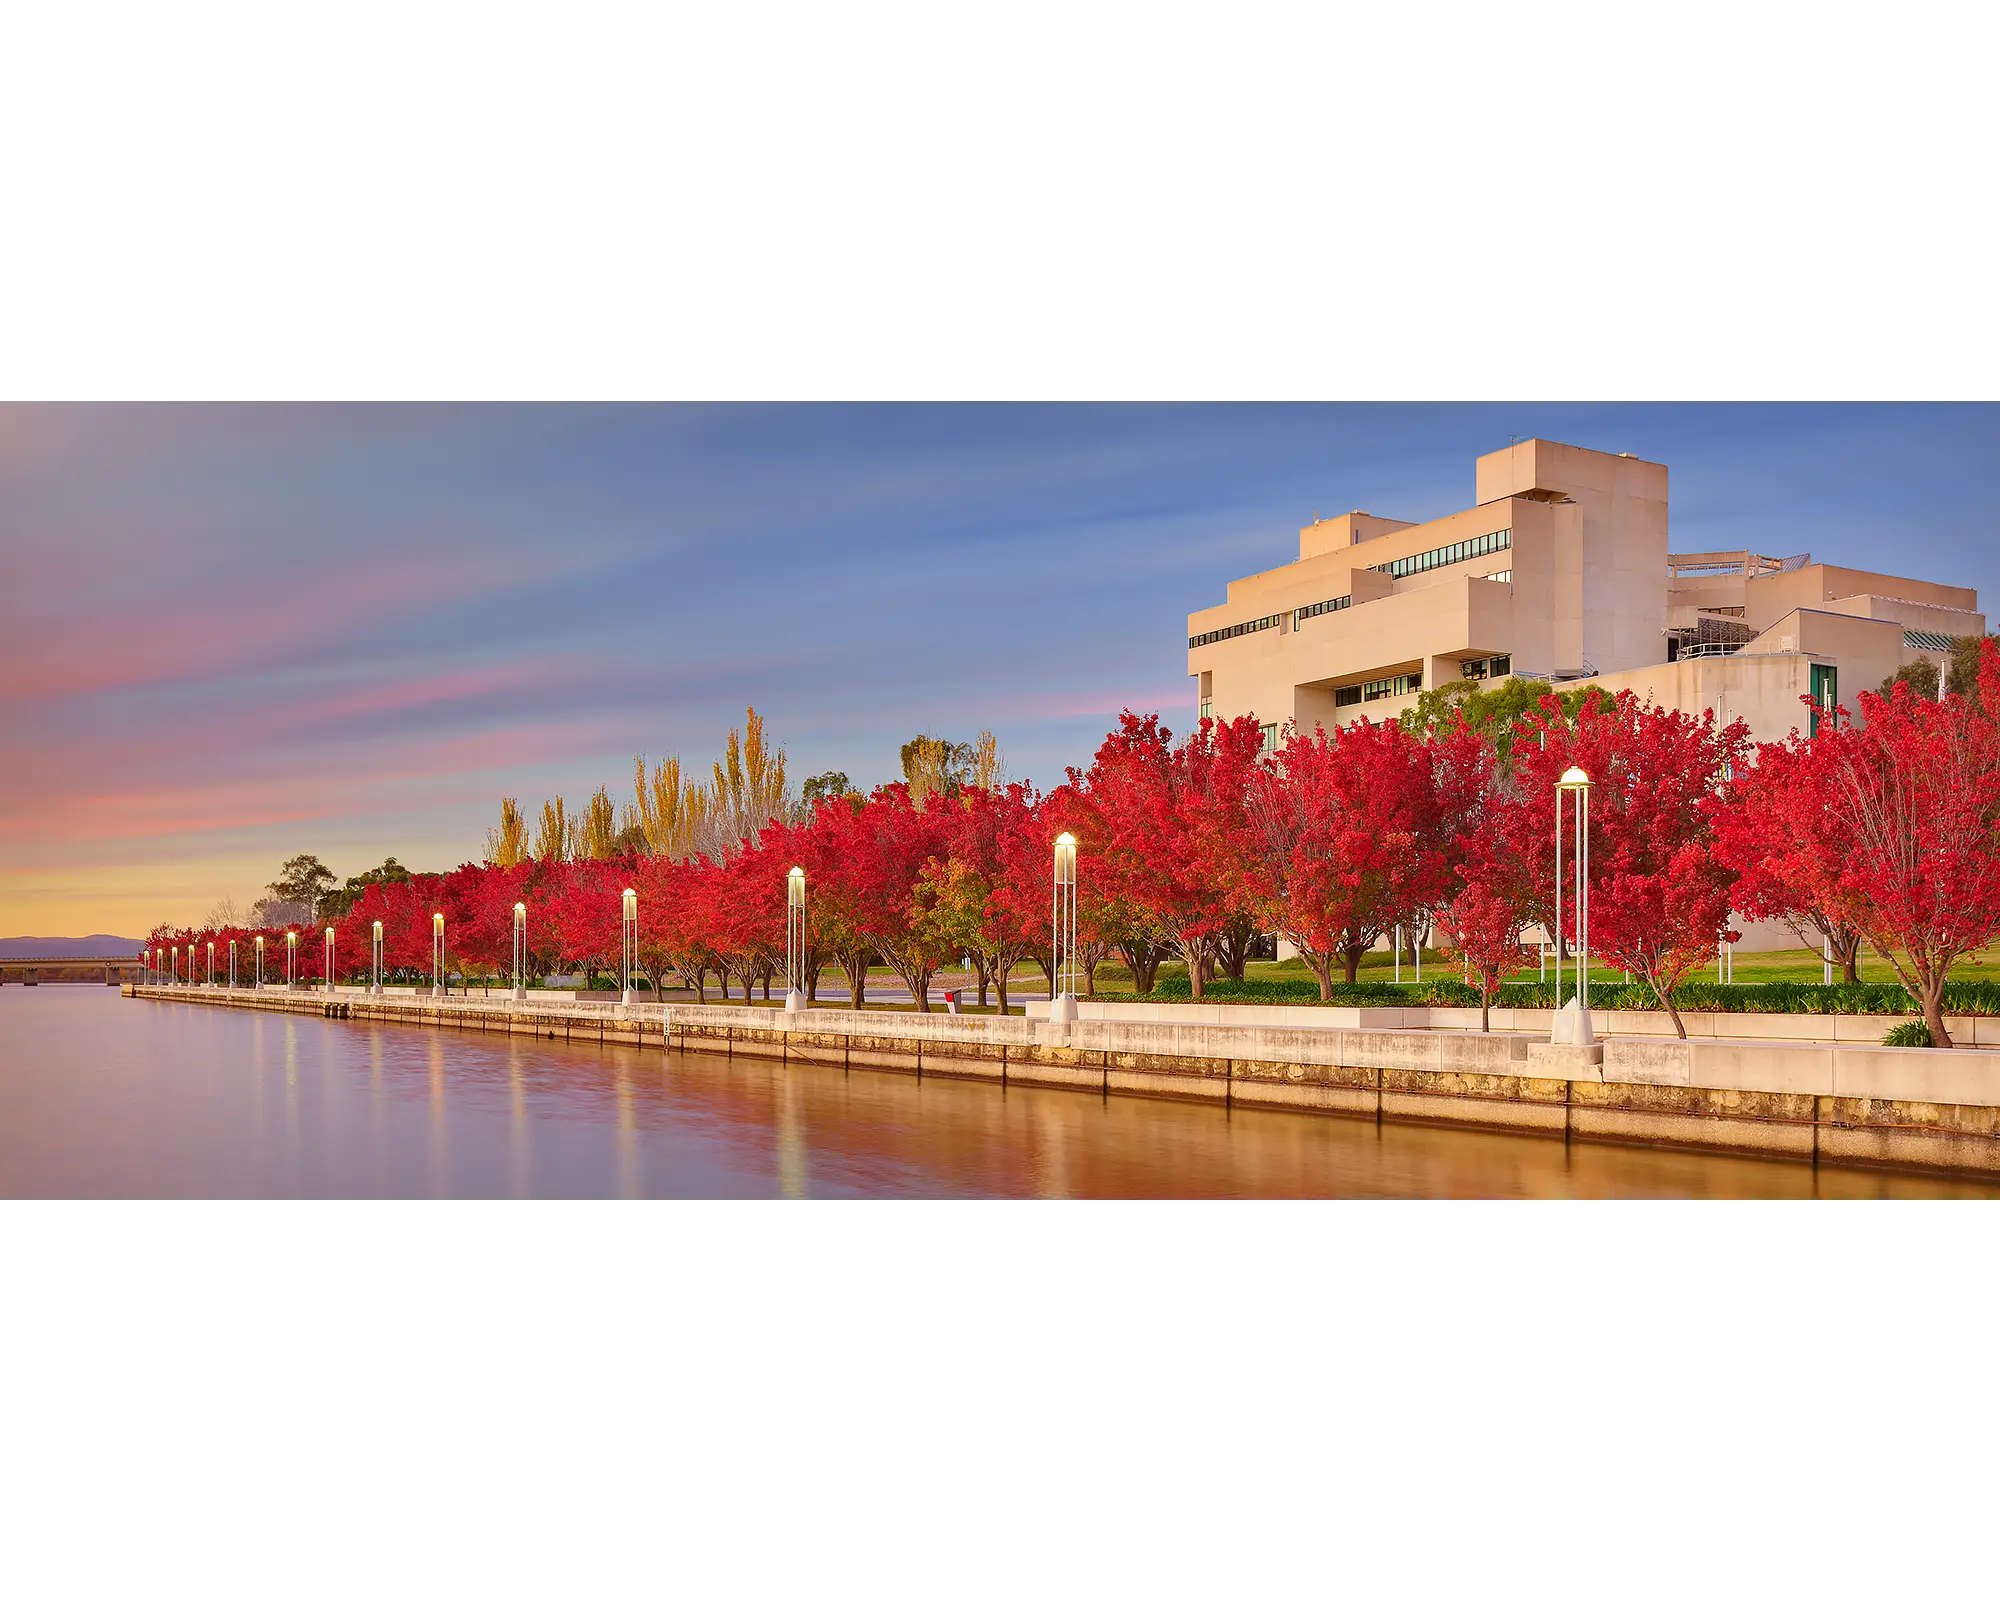 The High COurt - autumn sunrise with red trees, Canberra.